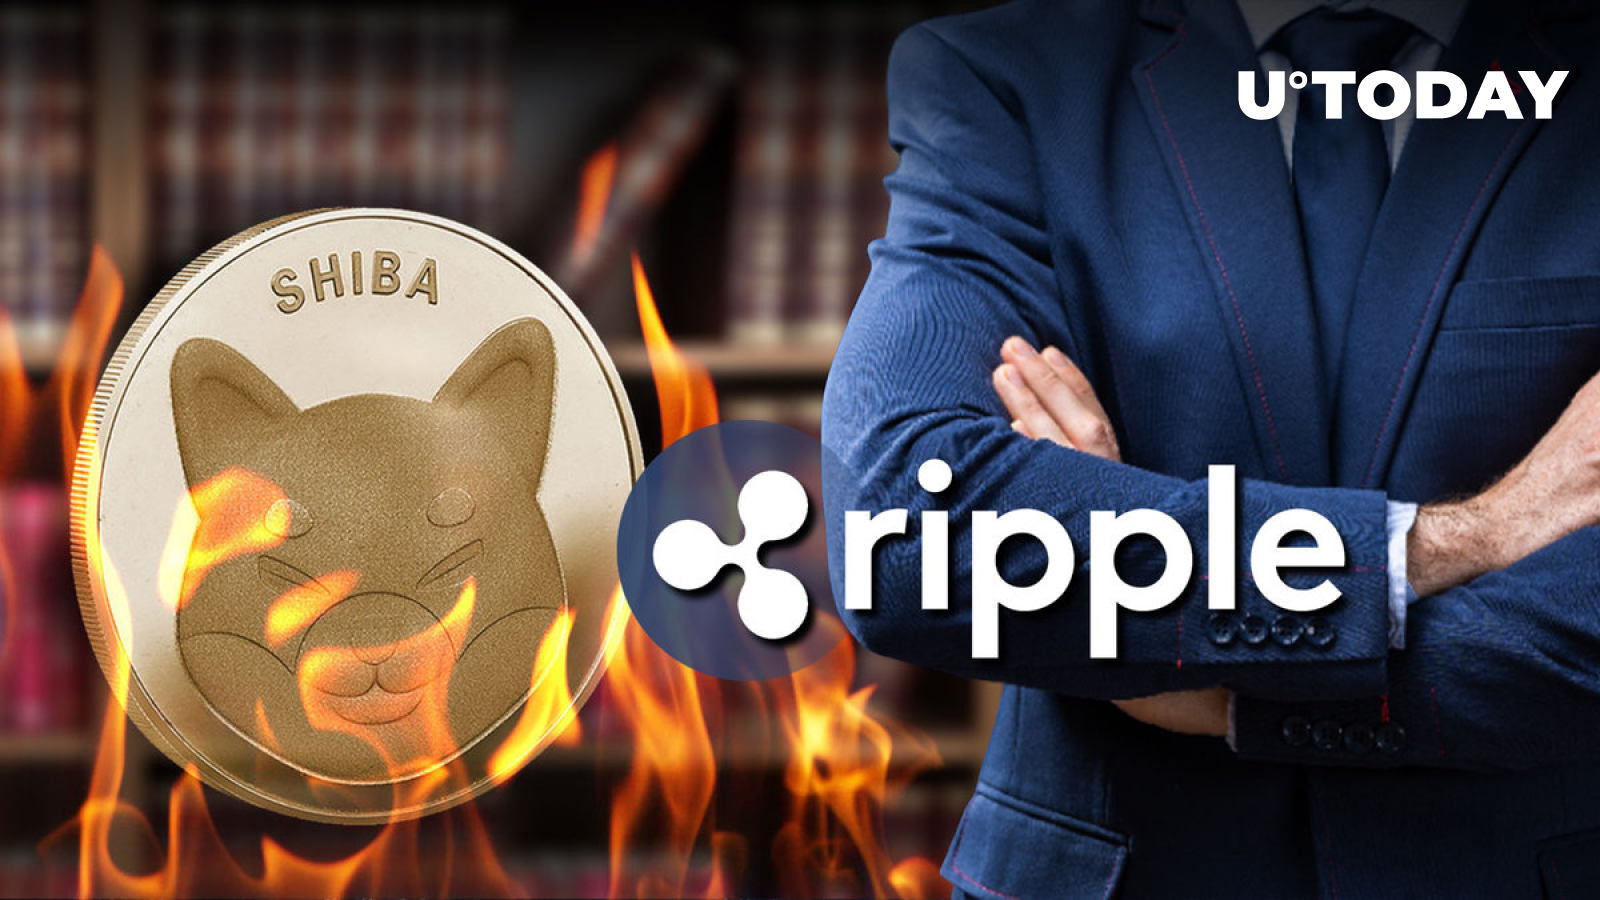 Shiba Inu: Pro Ripple Lawyer Comments on How Long It Might Take to Burn Enormous SHIB Supply